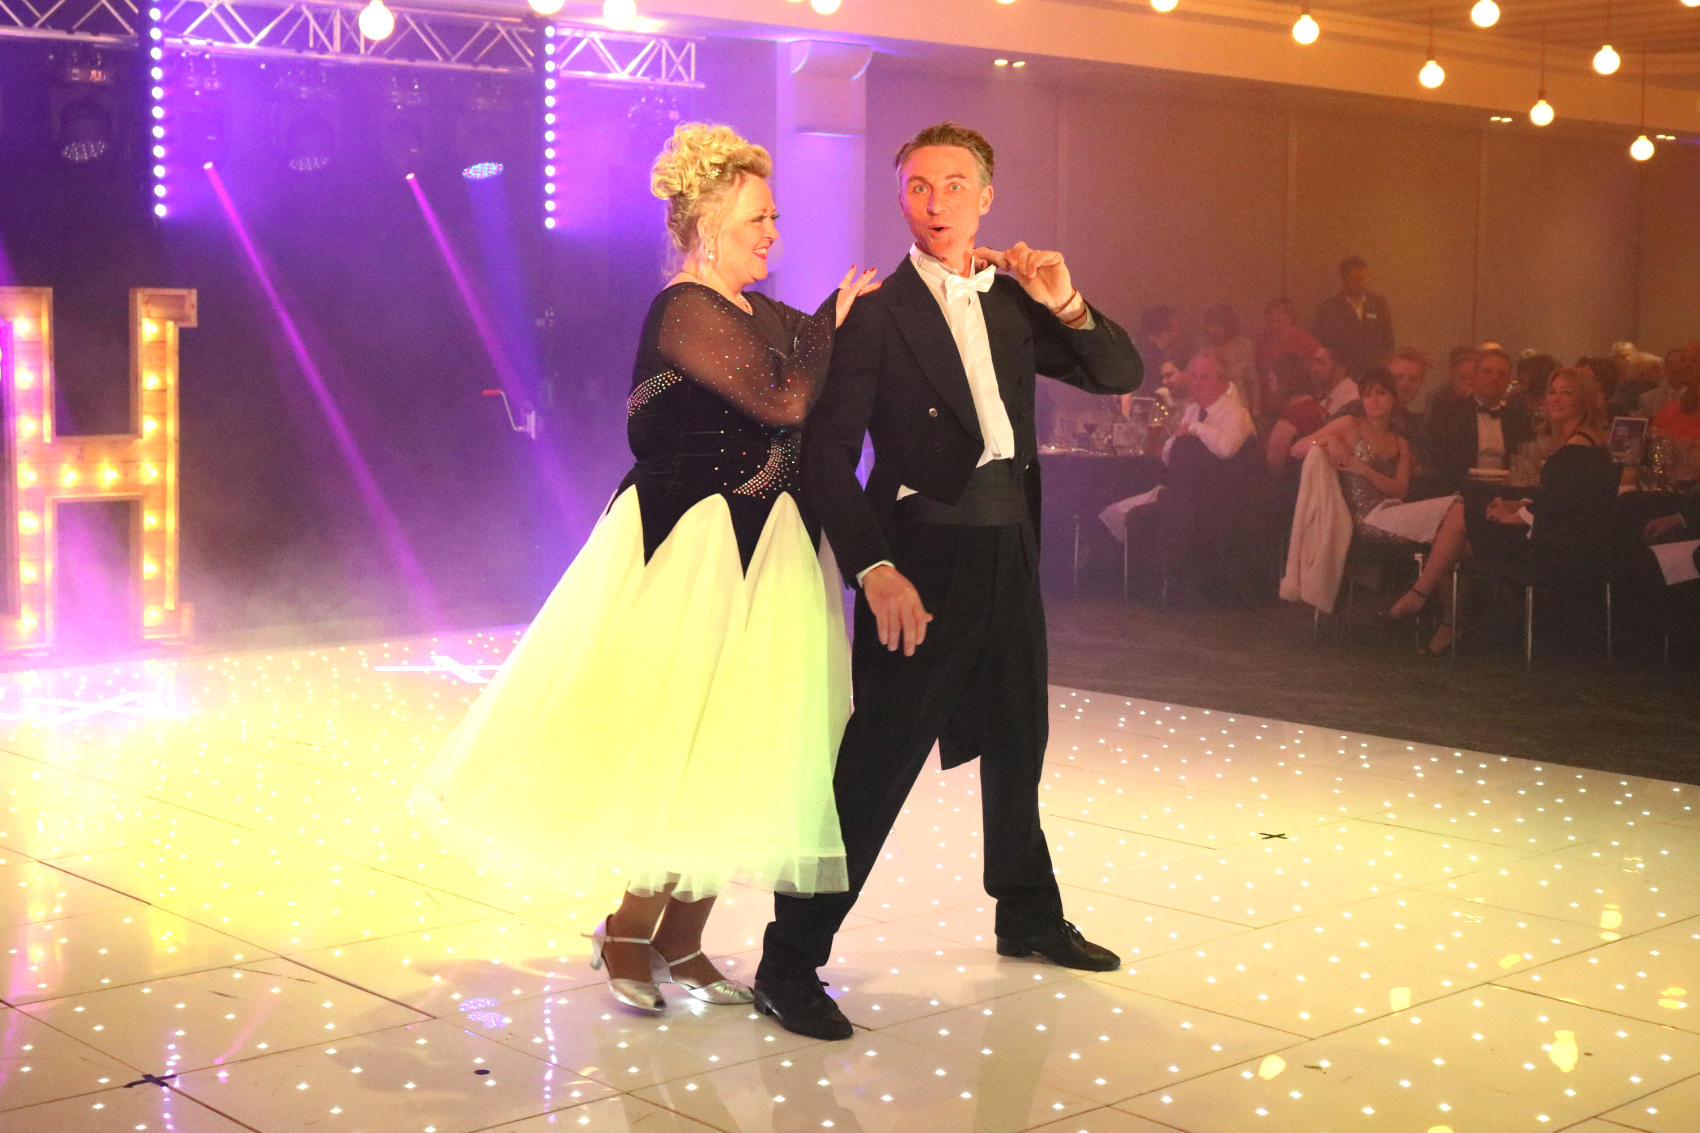 Competitors in last year’s Martin House’s Strictly Get Dancing